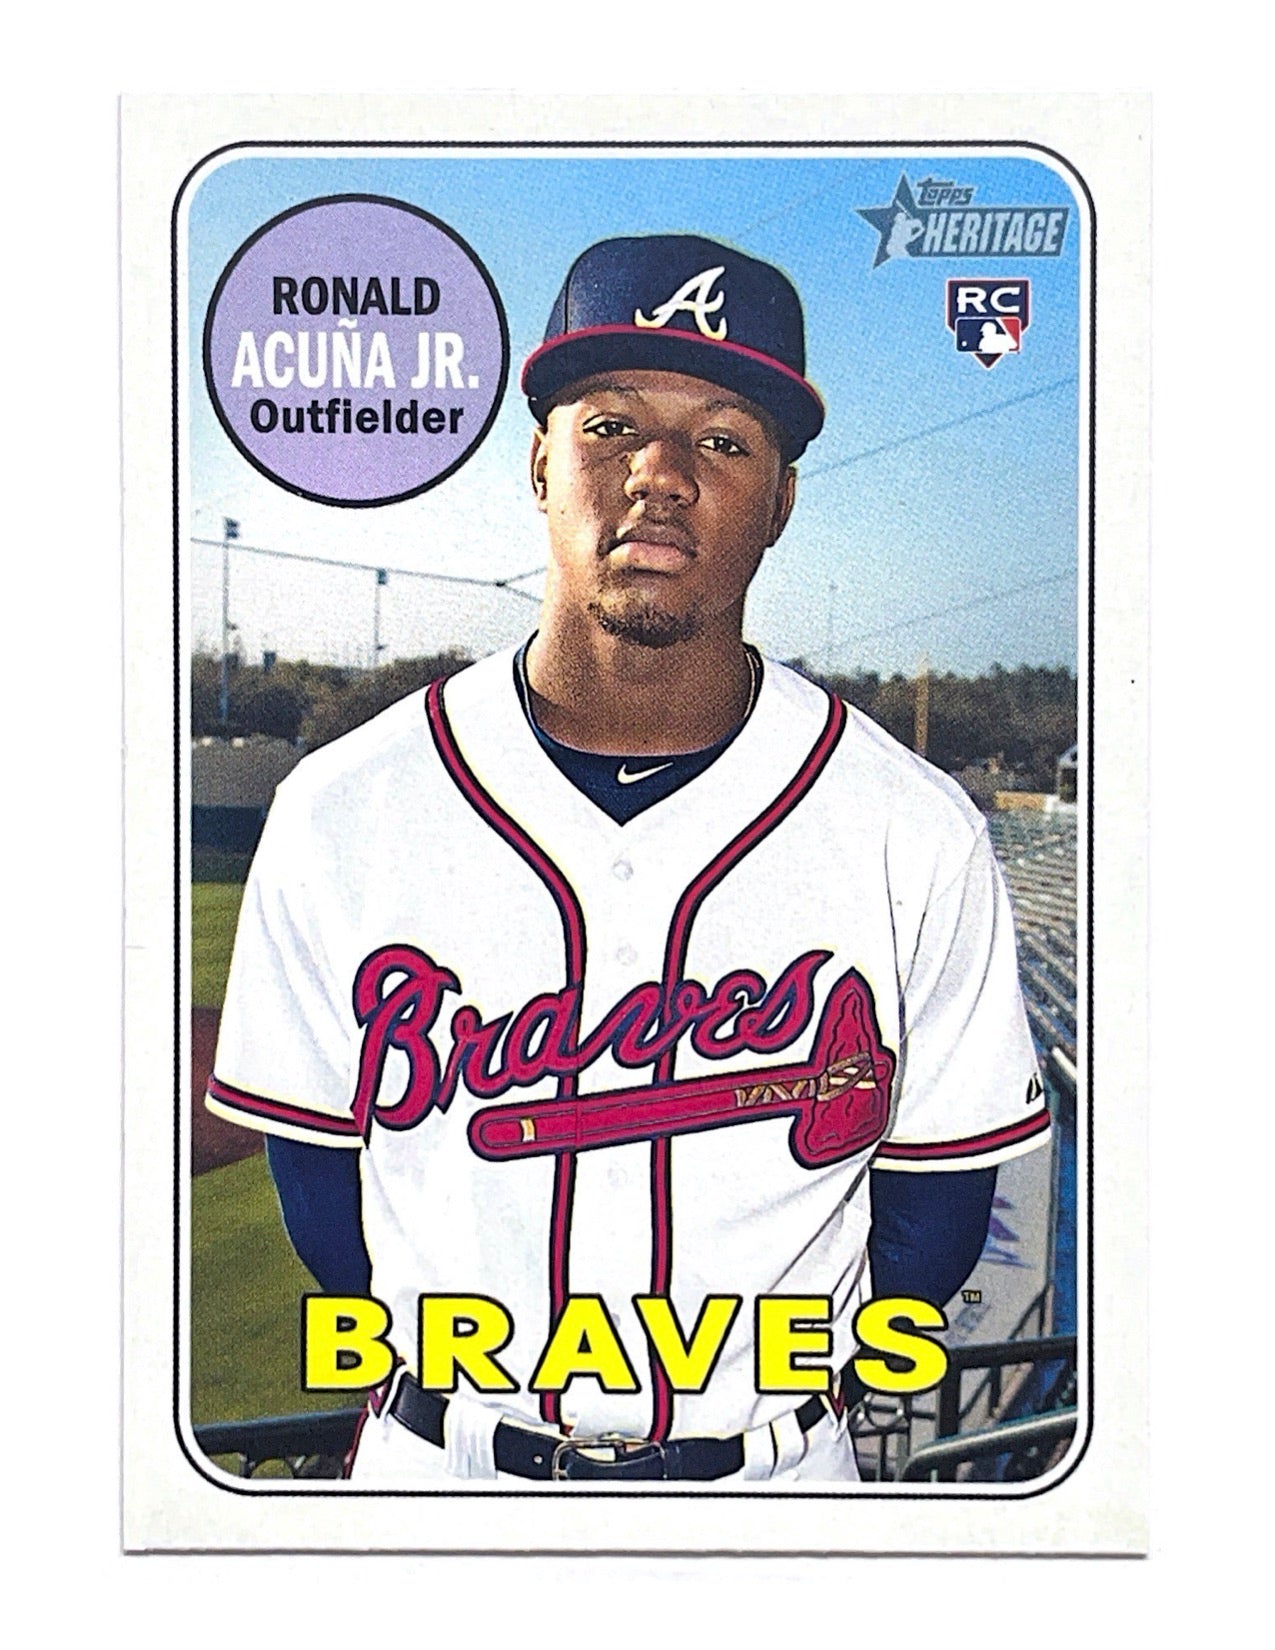 Ronald Acuna Jr. 2018 Topps Heritage Rookie #580